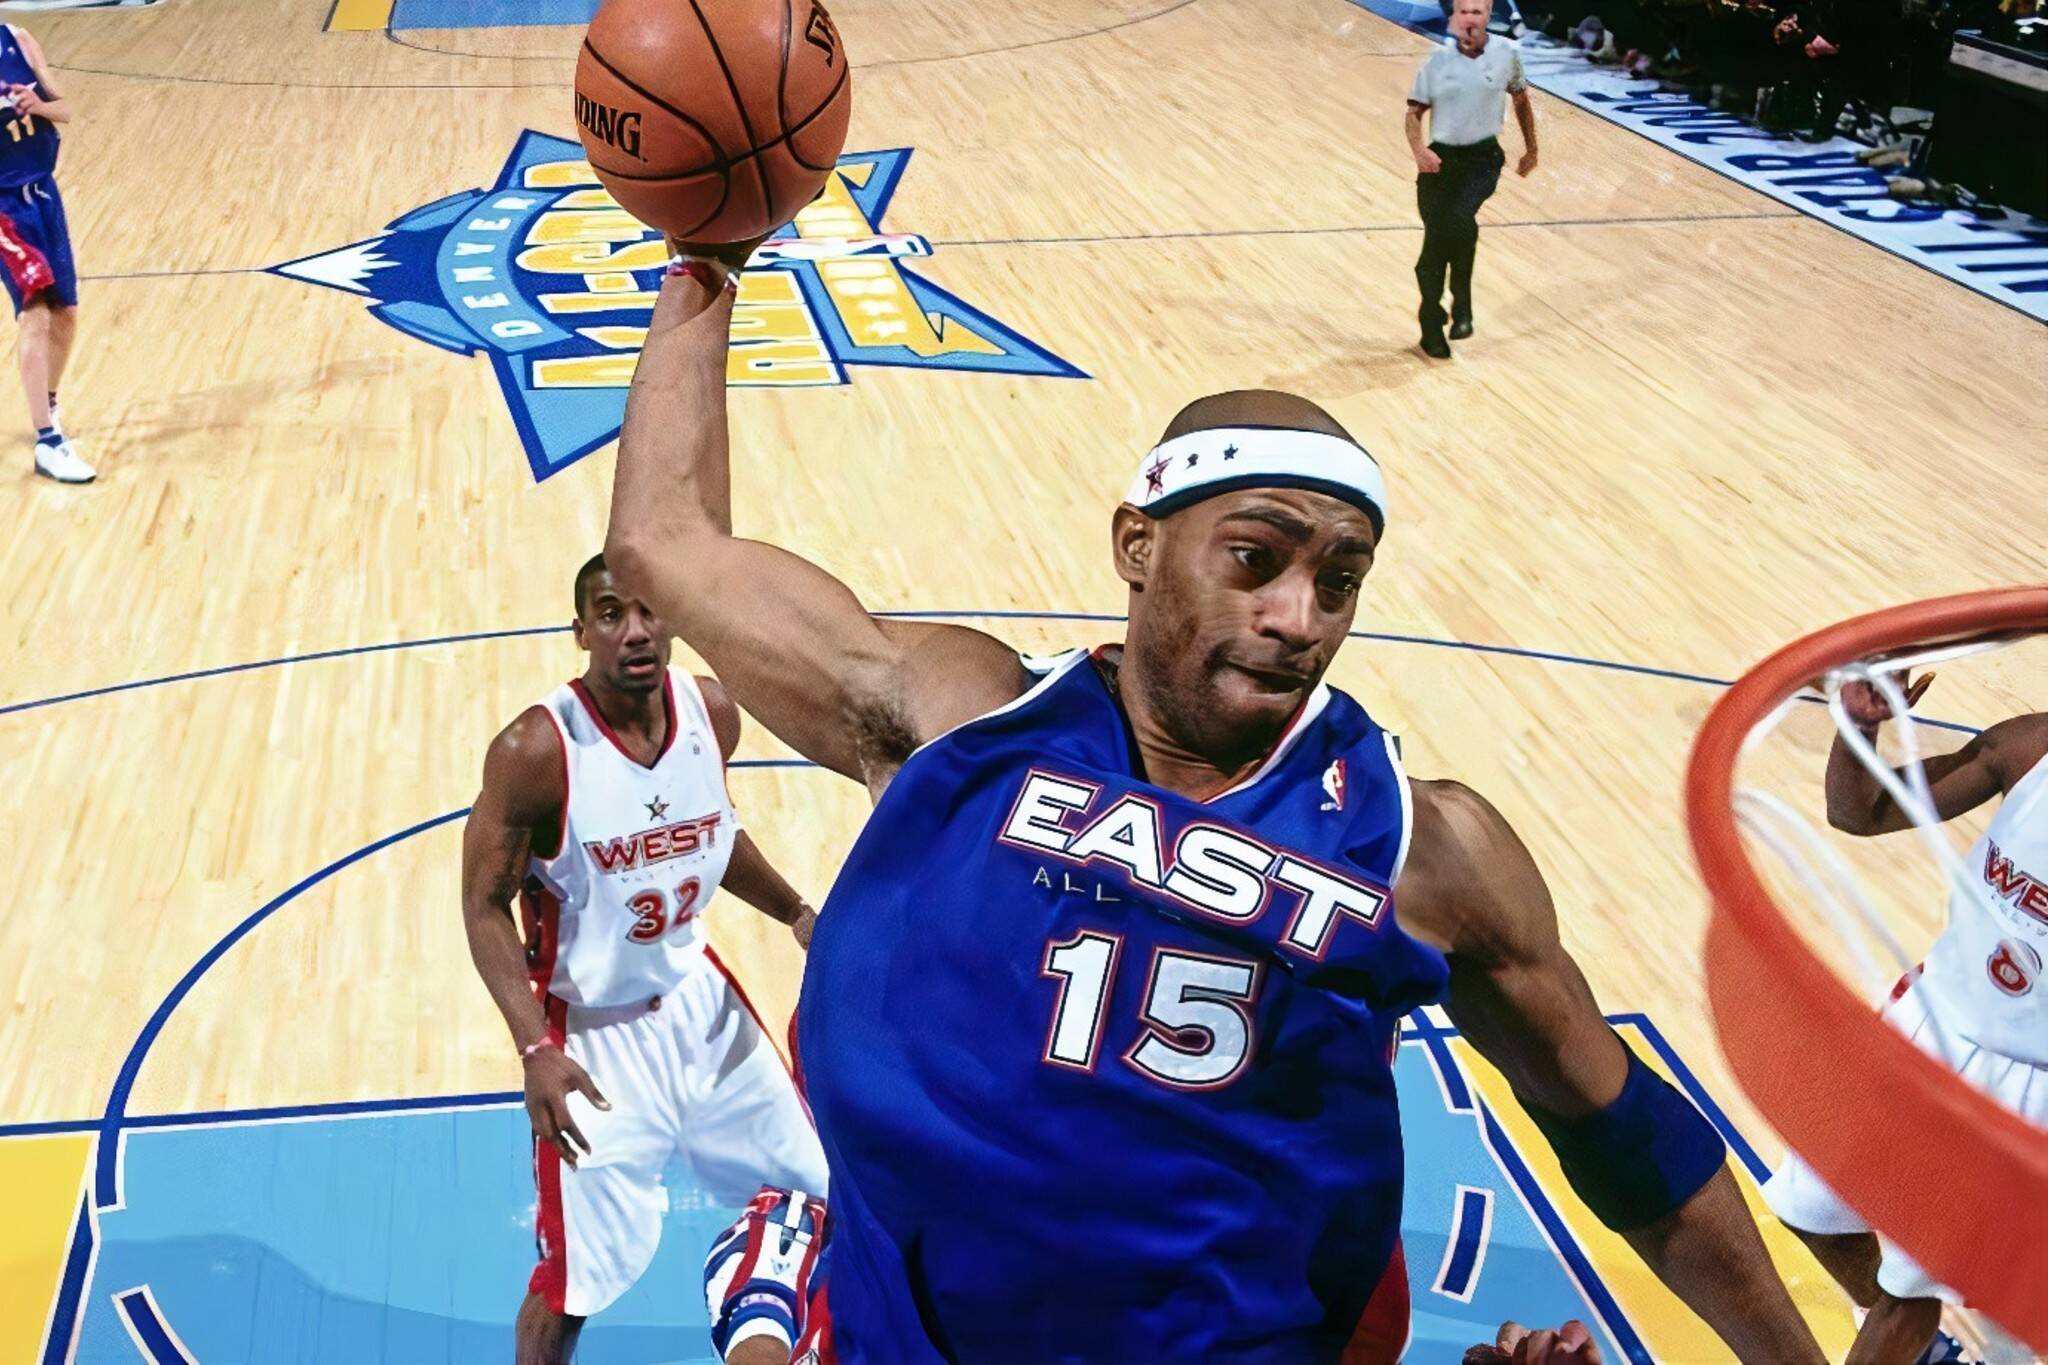 Vince Carter is retiring from the NBA after 22 seasons